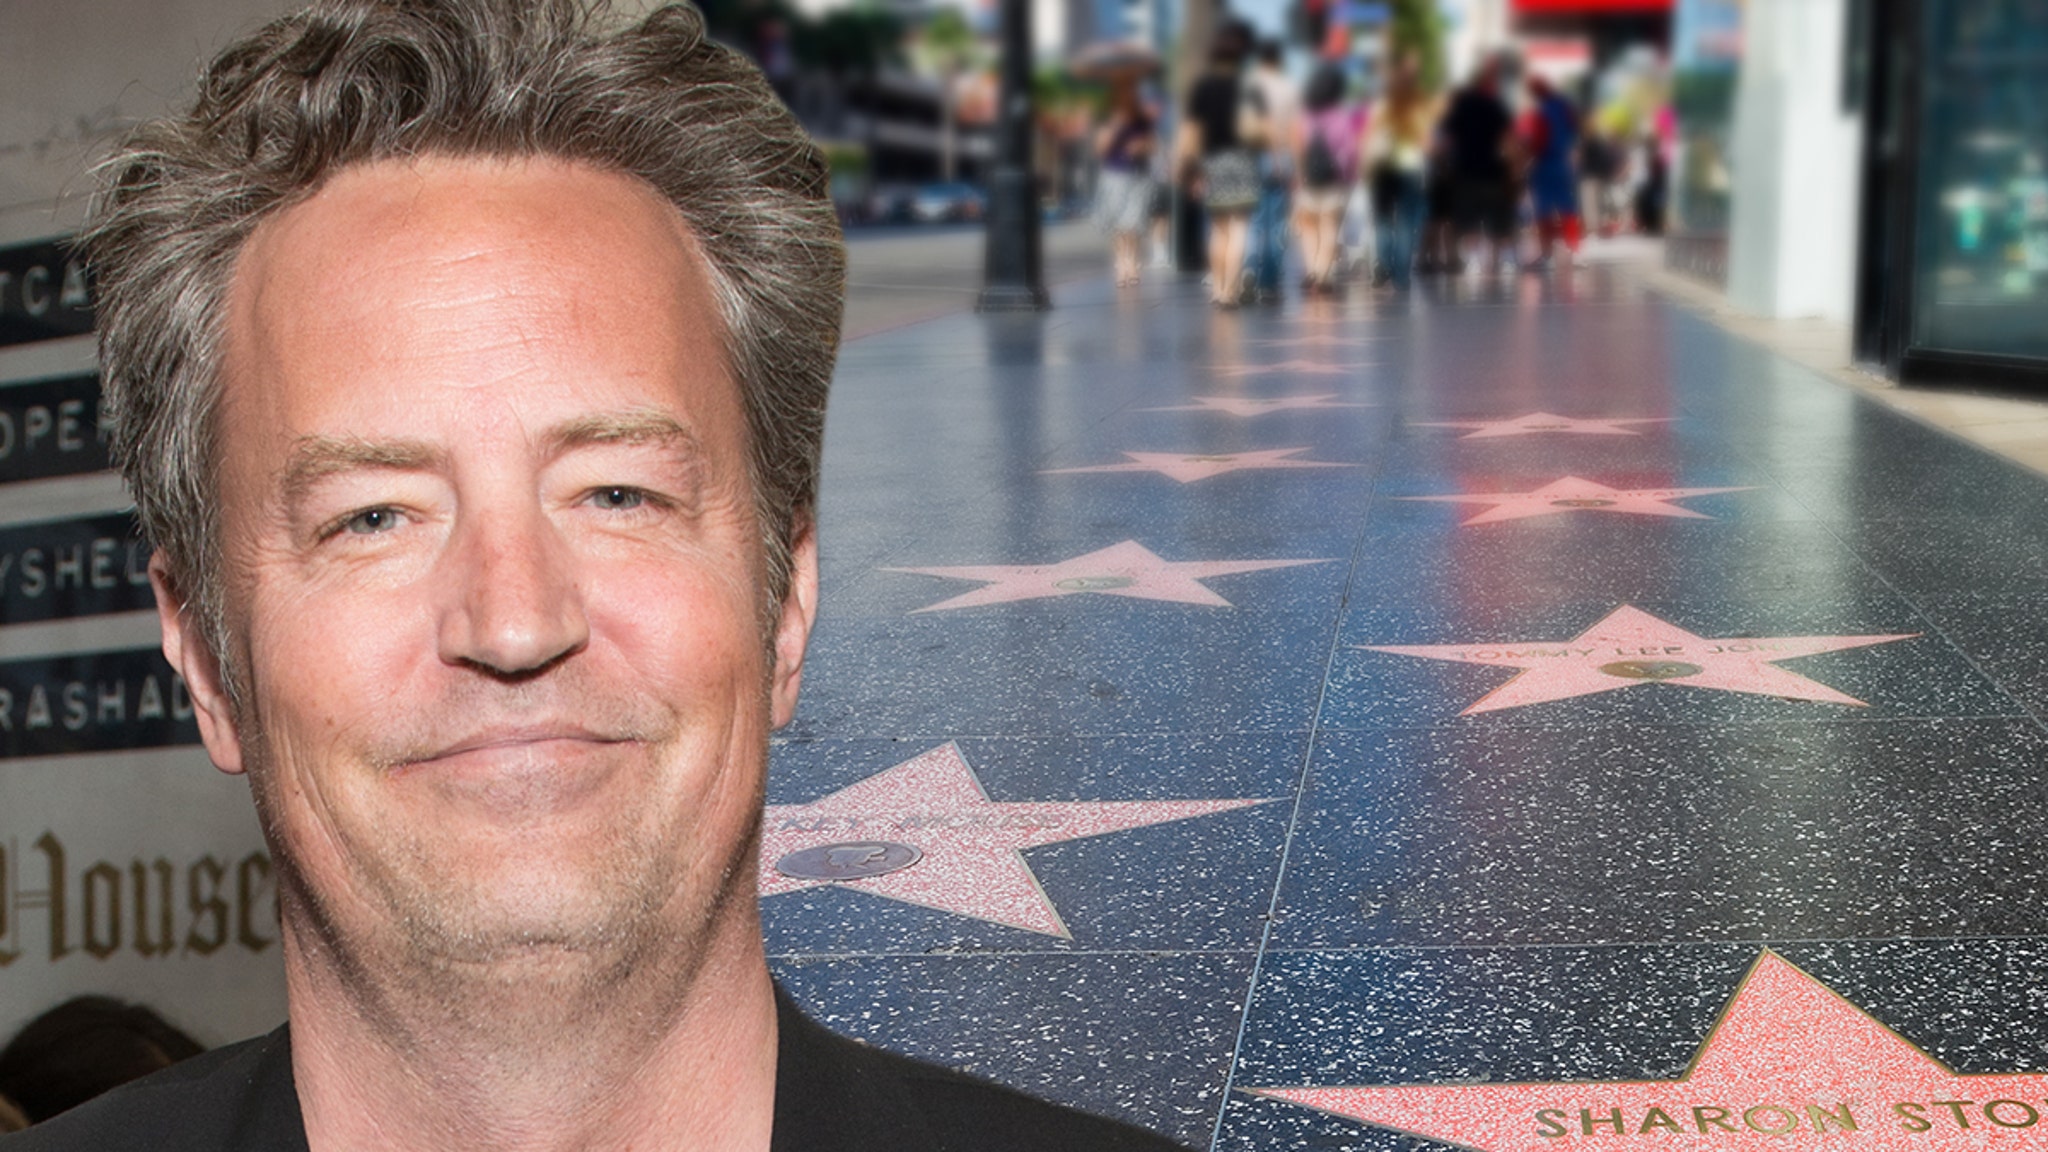 Hollywood Walk of Fame Would Love To Honor Matthew Perry, But It’s Up To Family